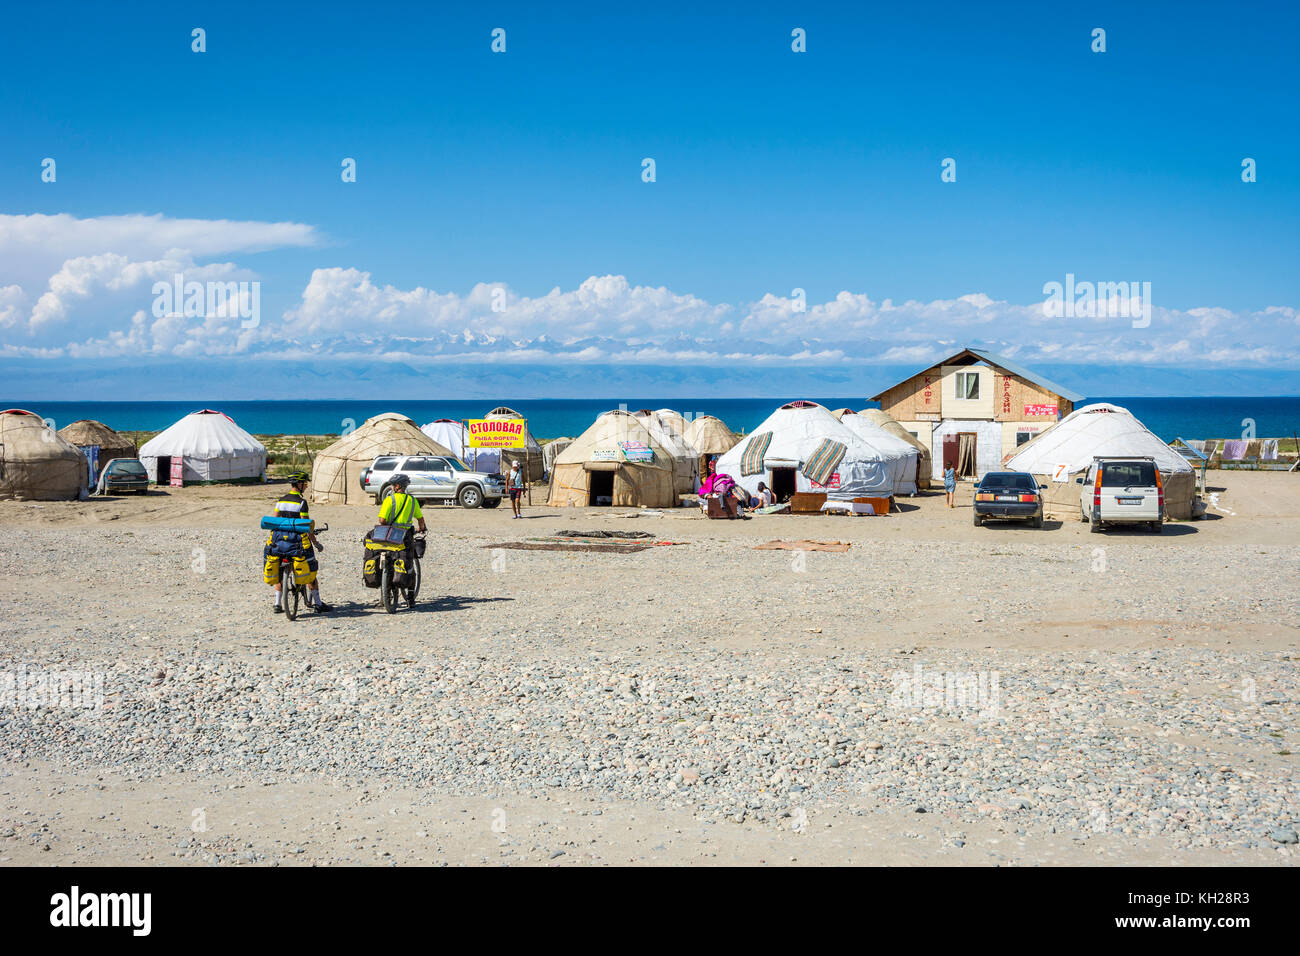 KYZYL TOO, KYRGYZSTAN - AUGUST 8: Two bikers by the yurts next to Karakol lake and the mountains behind. August 2016 Stock Photo